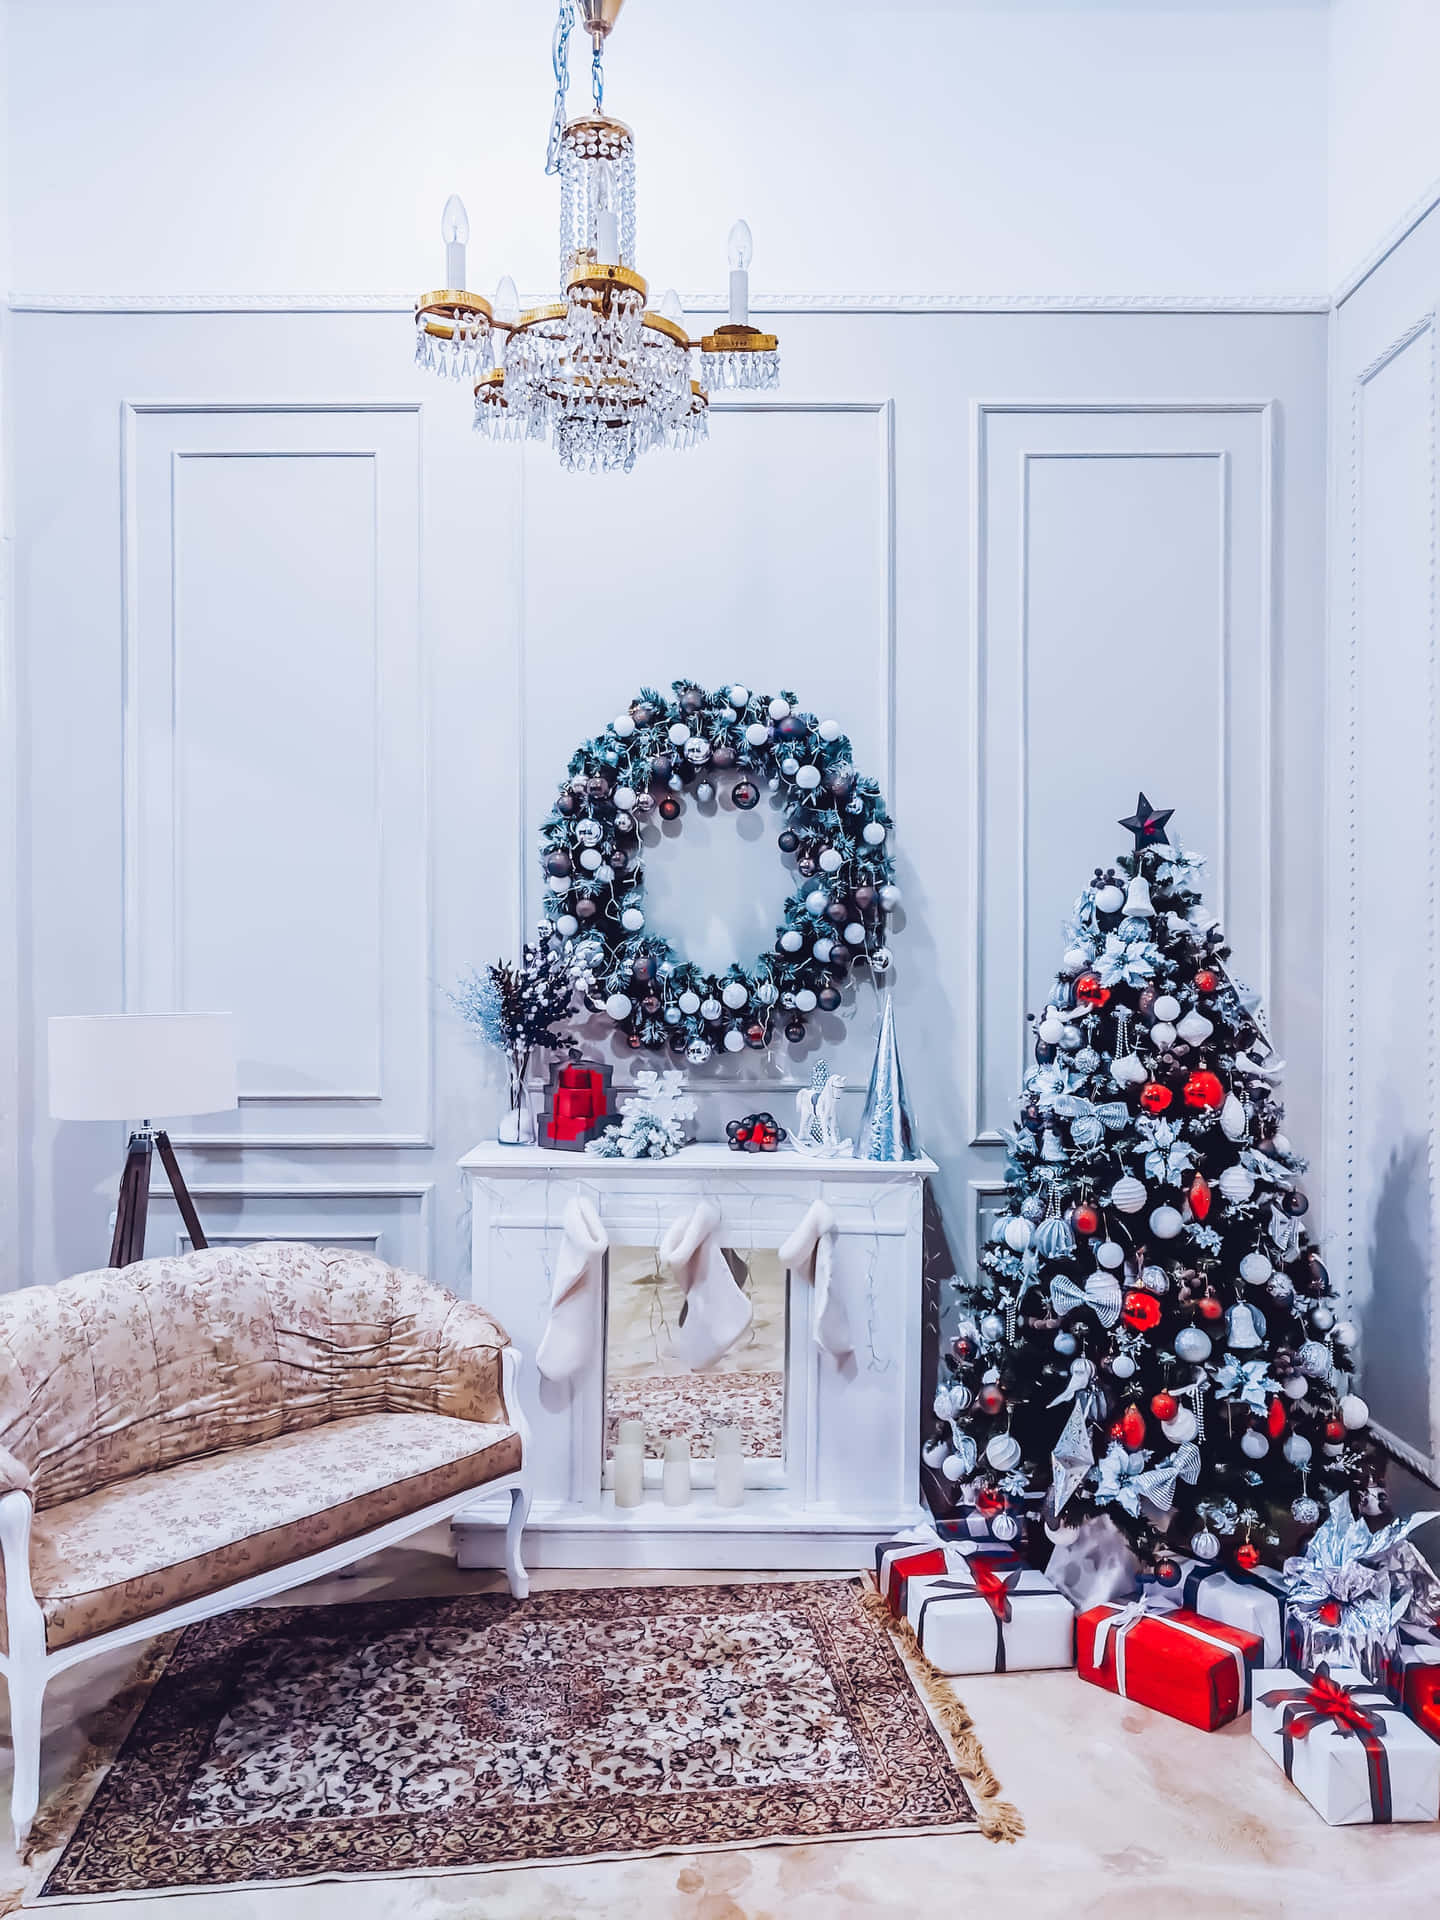 A festive aesthetic Christmas tree with presents at the foot Wallpaper